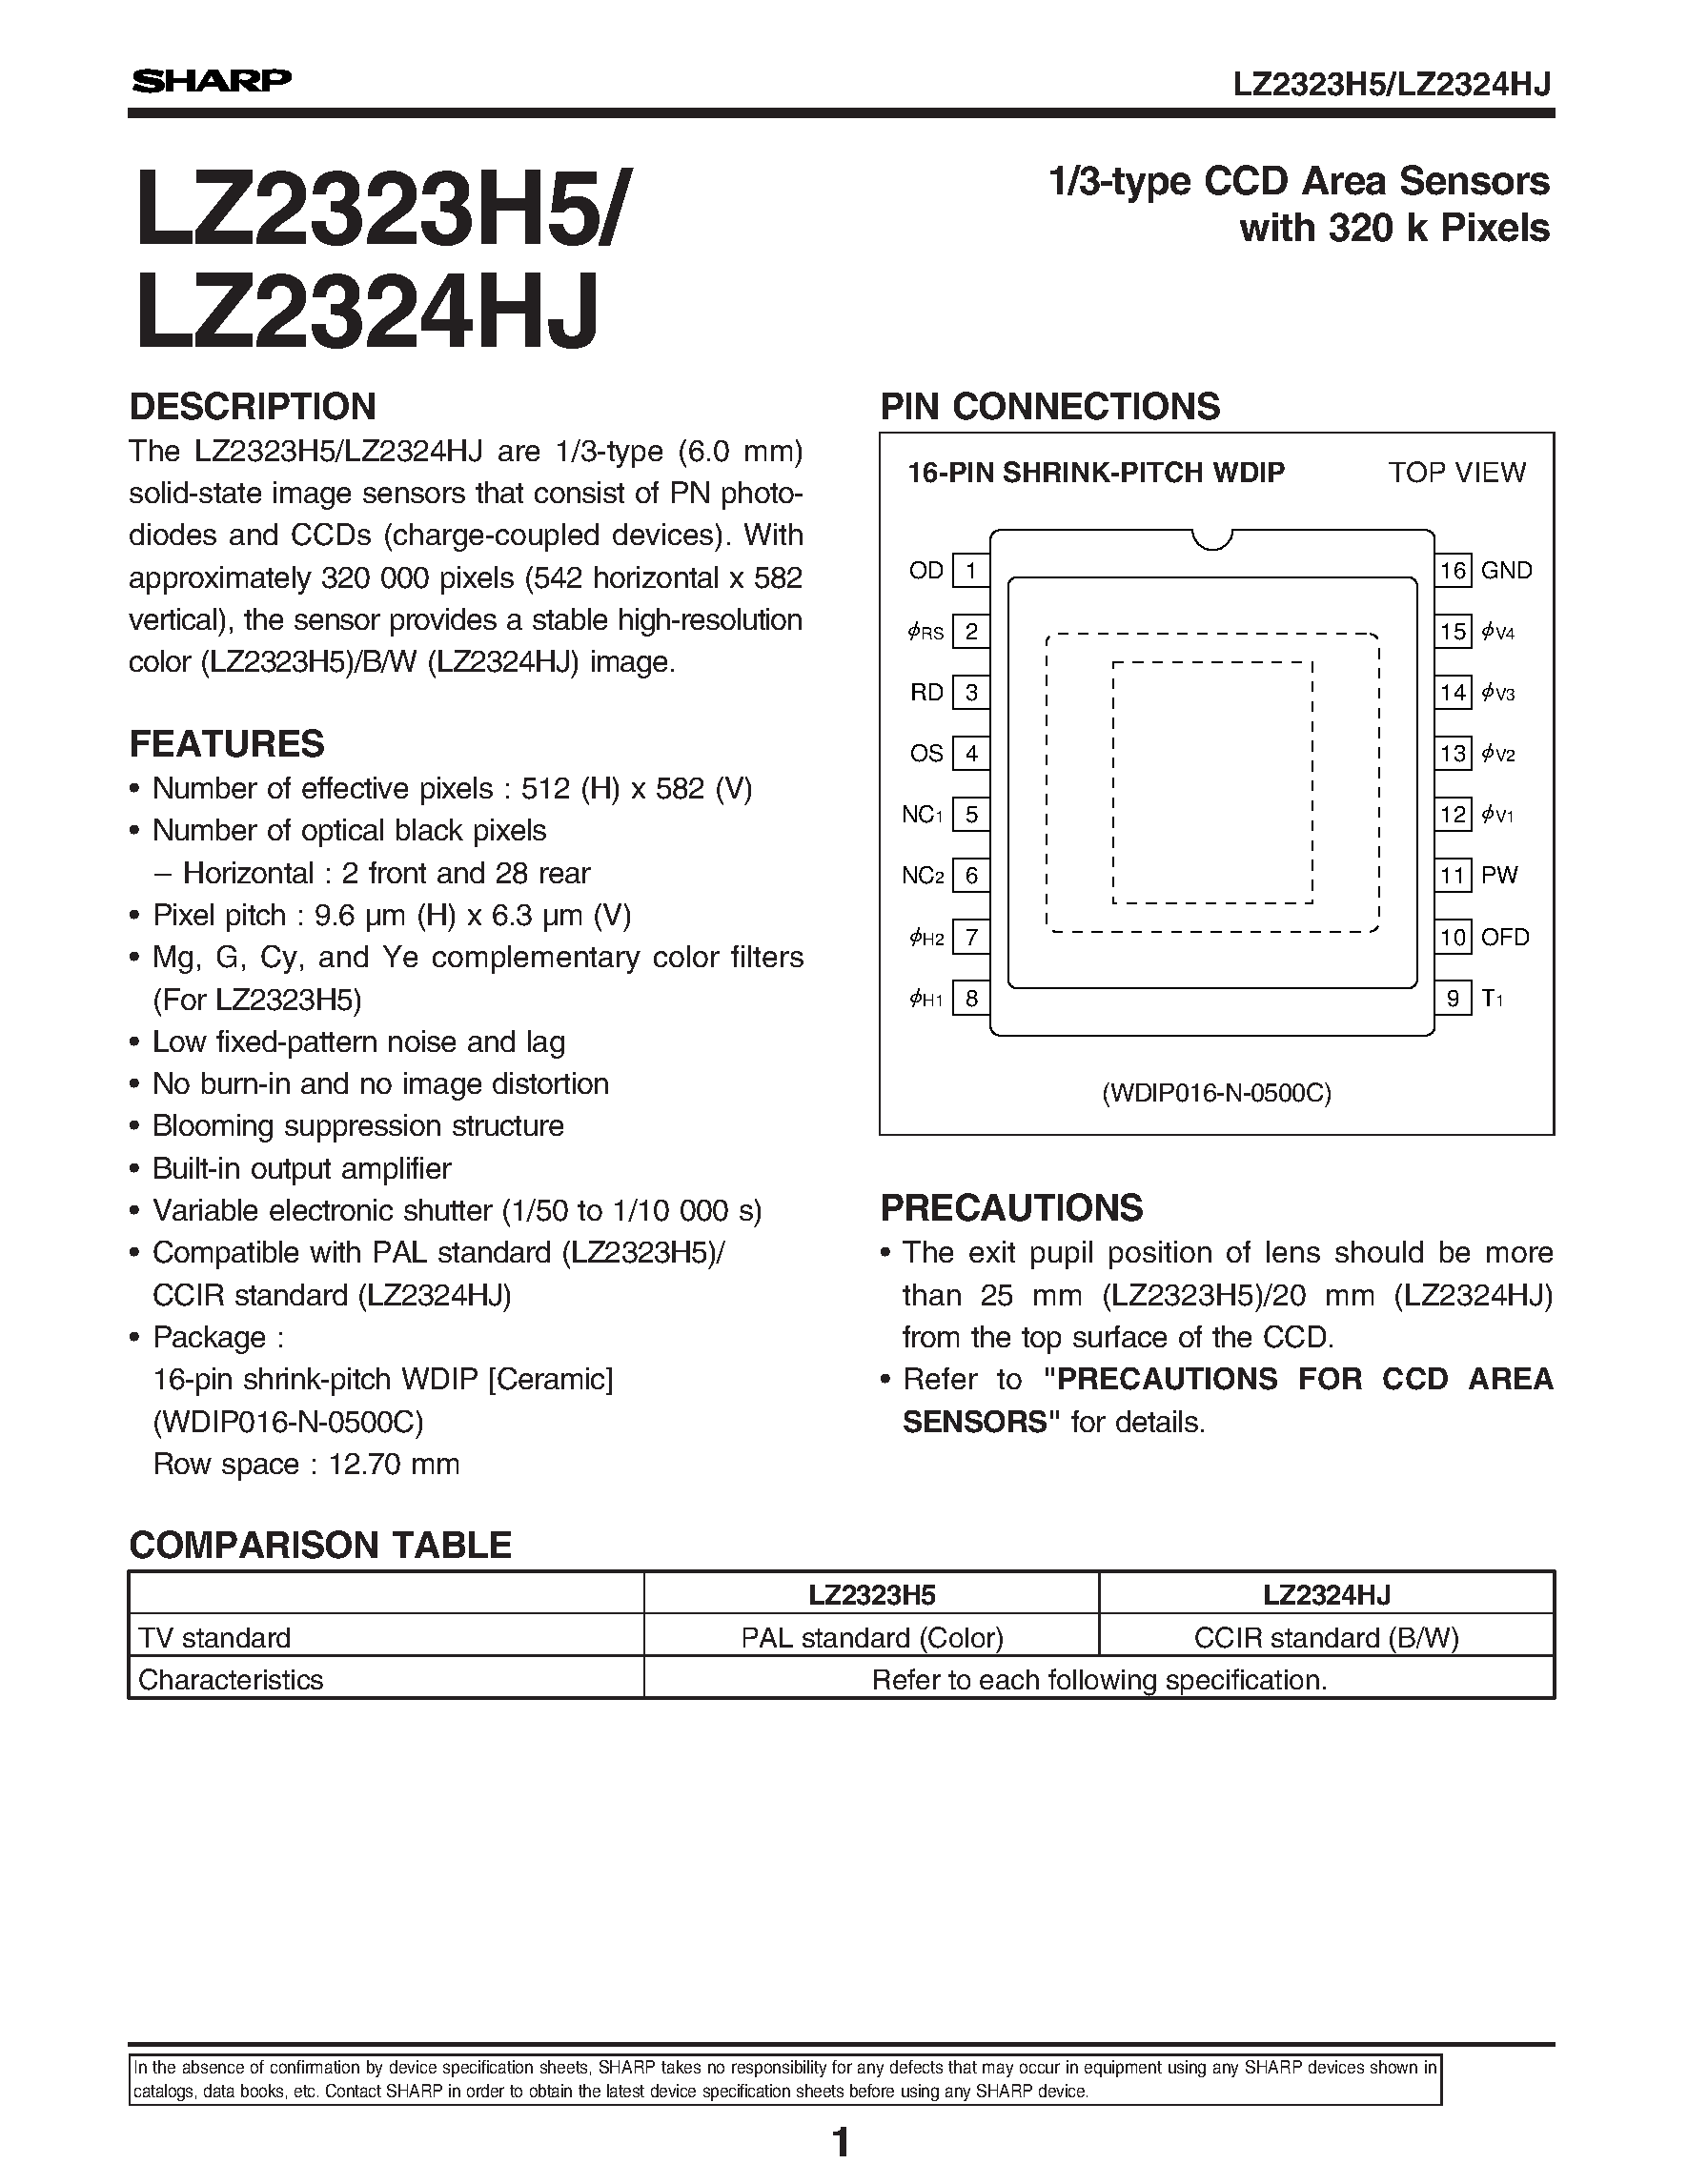 Datasheet LZ2324HJ - 1/3-type CCD Area Sensors with 320 k Pixels page 1